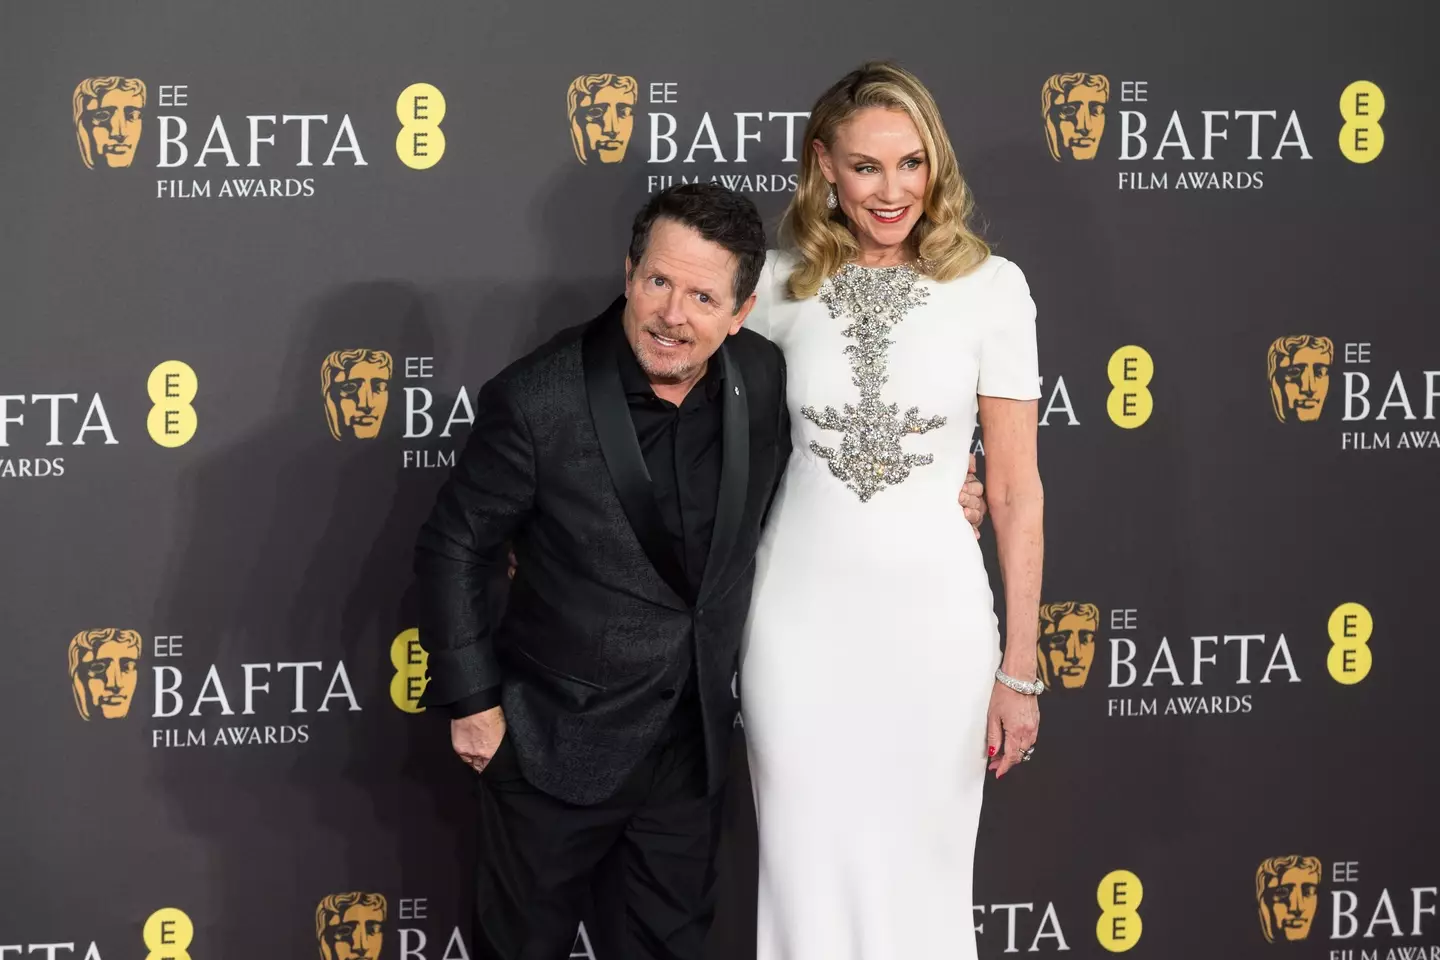 Michael J Fox and wife Tracy Pollan at the Baftas.